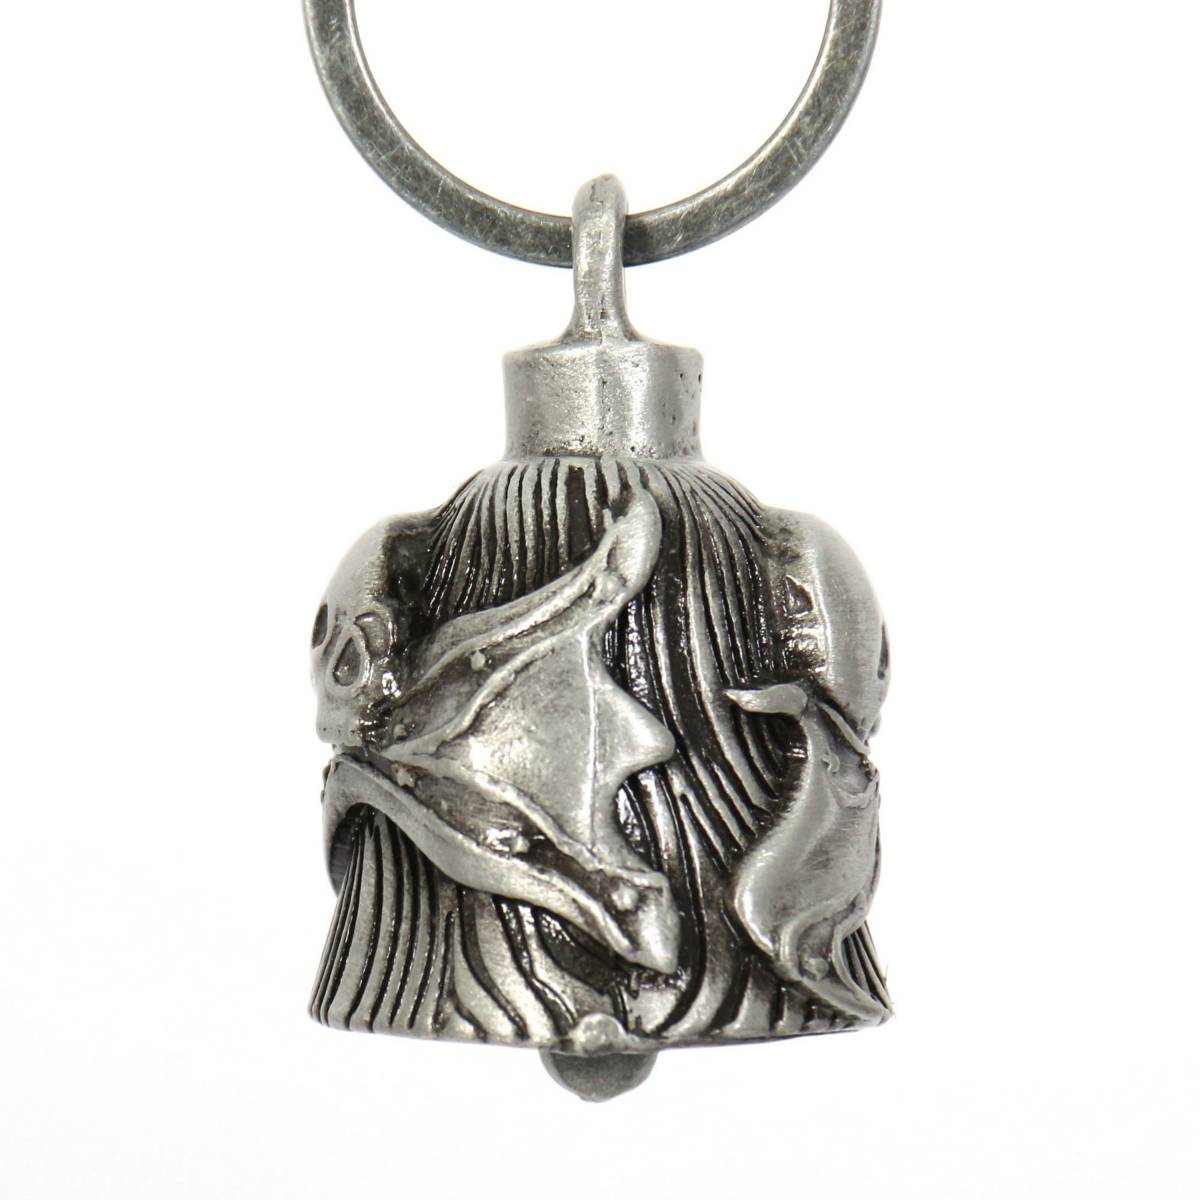 Milwaukee Leather MLB9040 'Skull' Motorcycle Good Luck Bell | Key Chain Accessory for Bikers